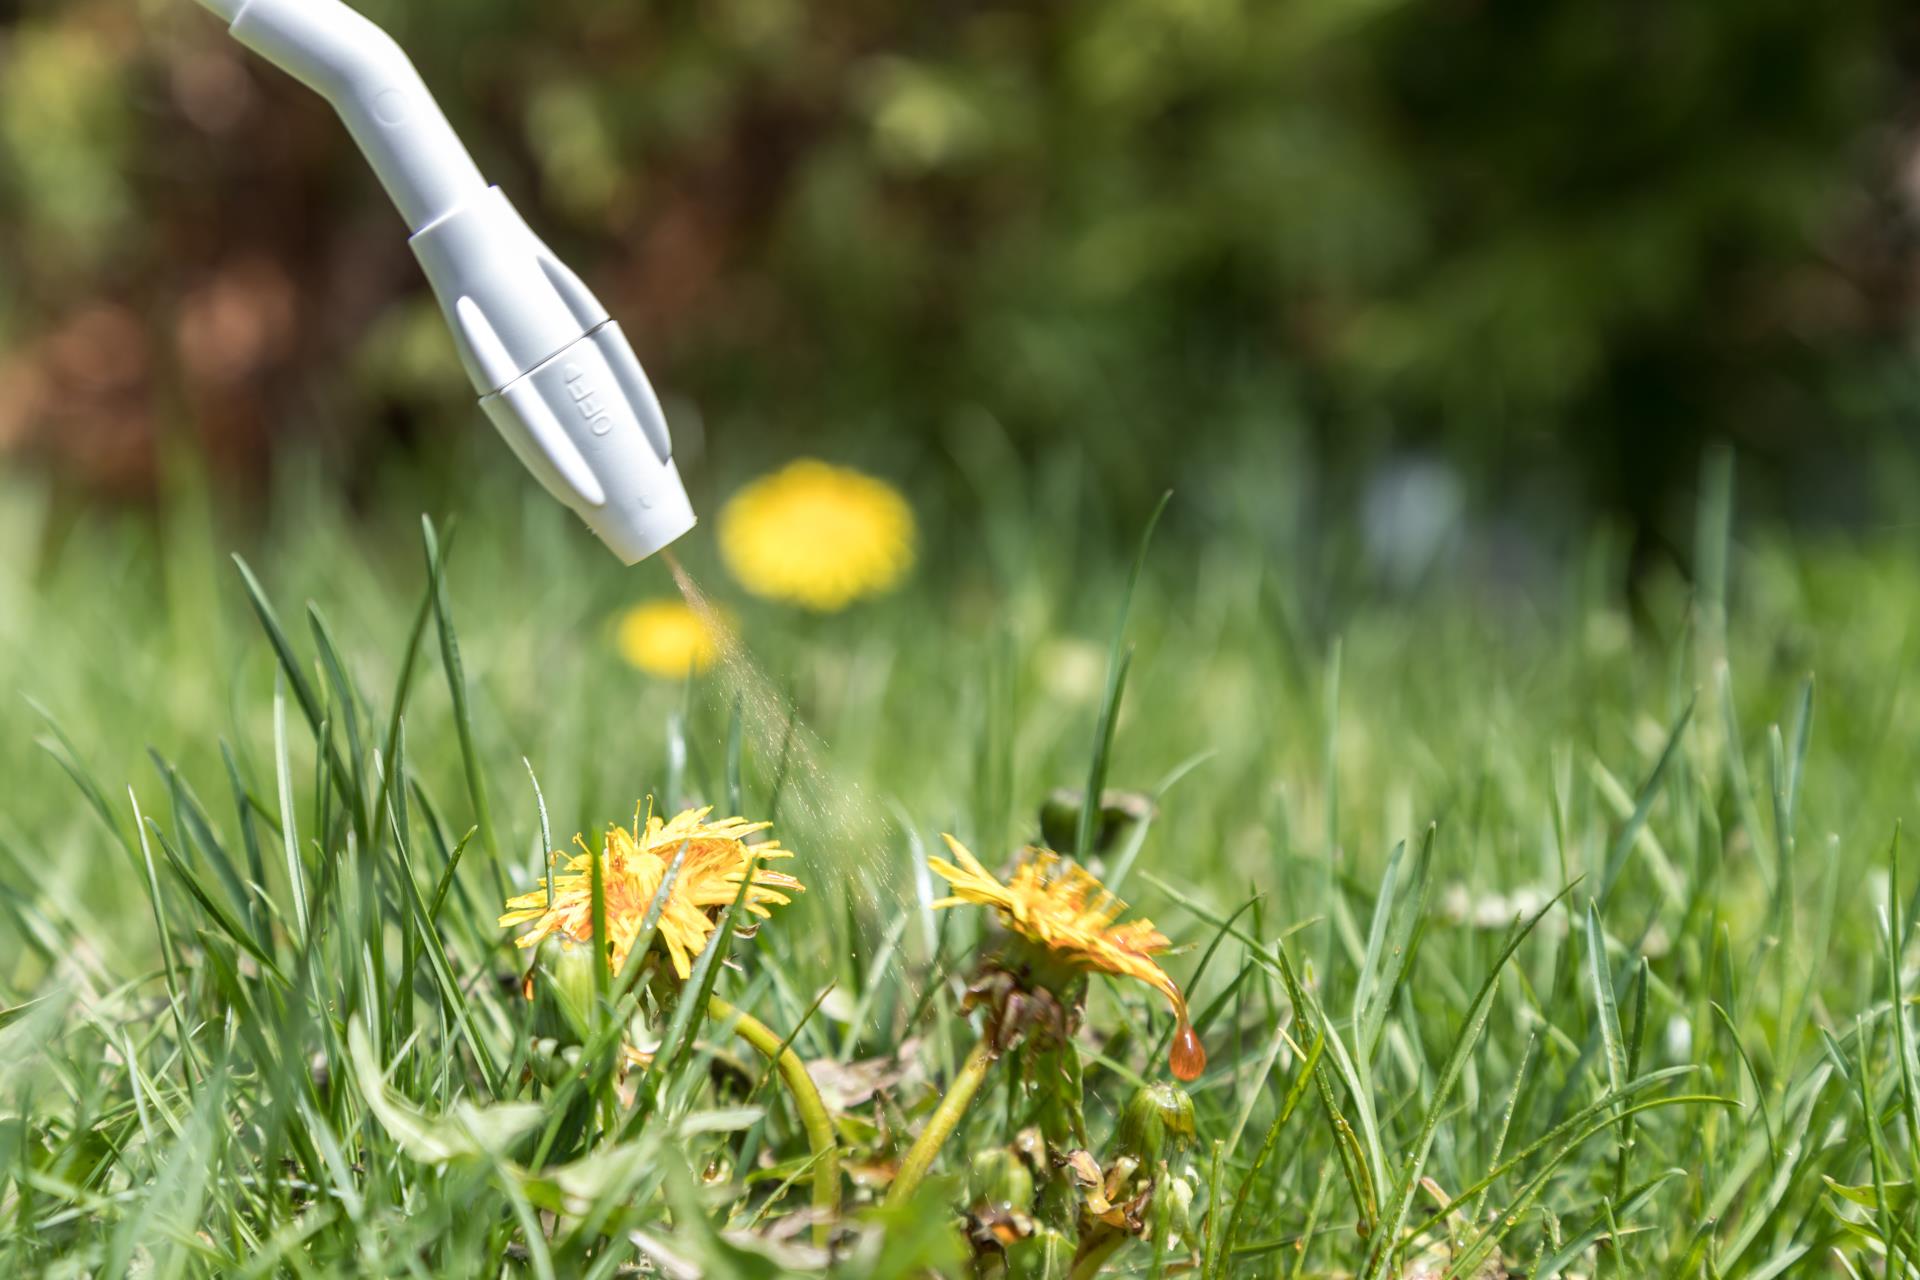 Controlling weeds in community parks